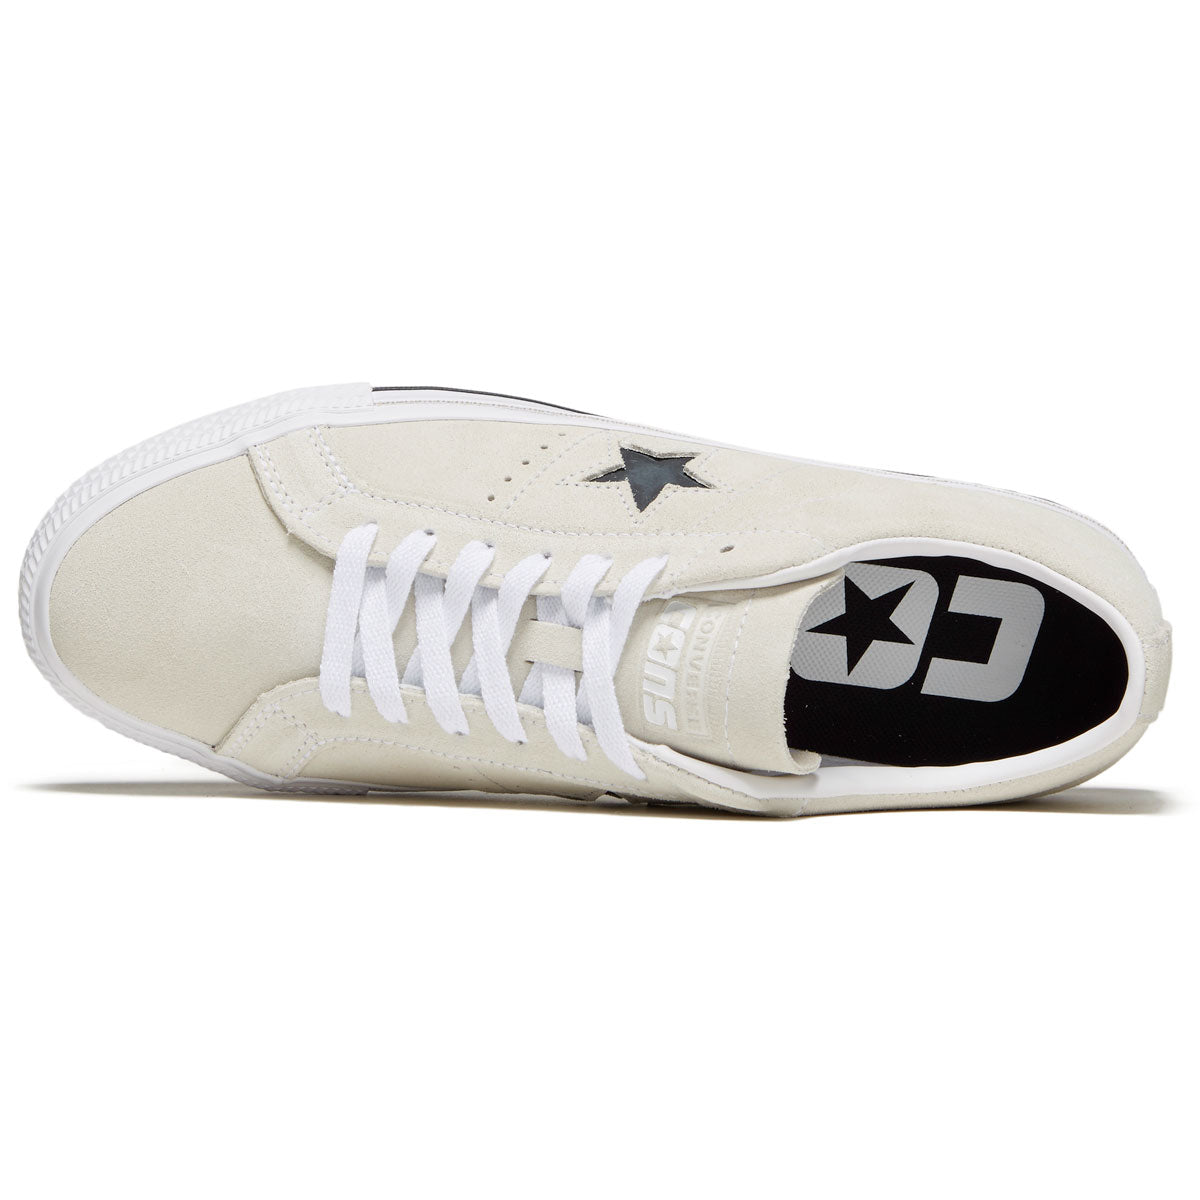 Converse One Star Pro Suede Shoes - Egret/White/Black image 3